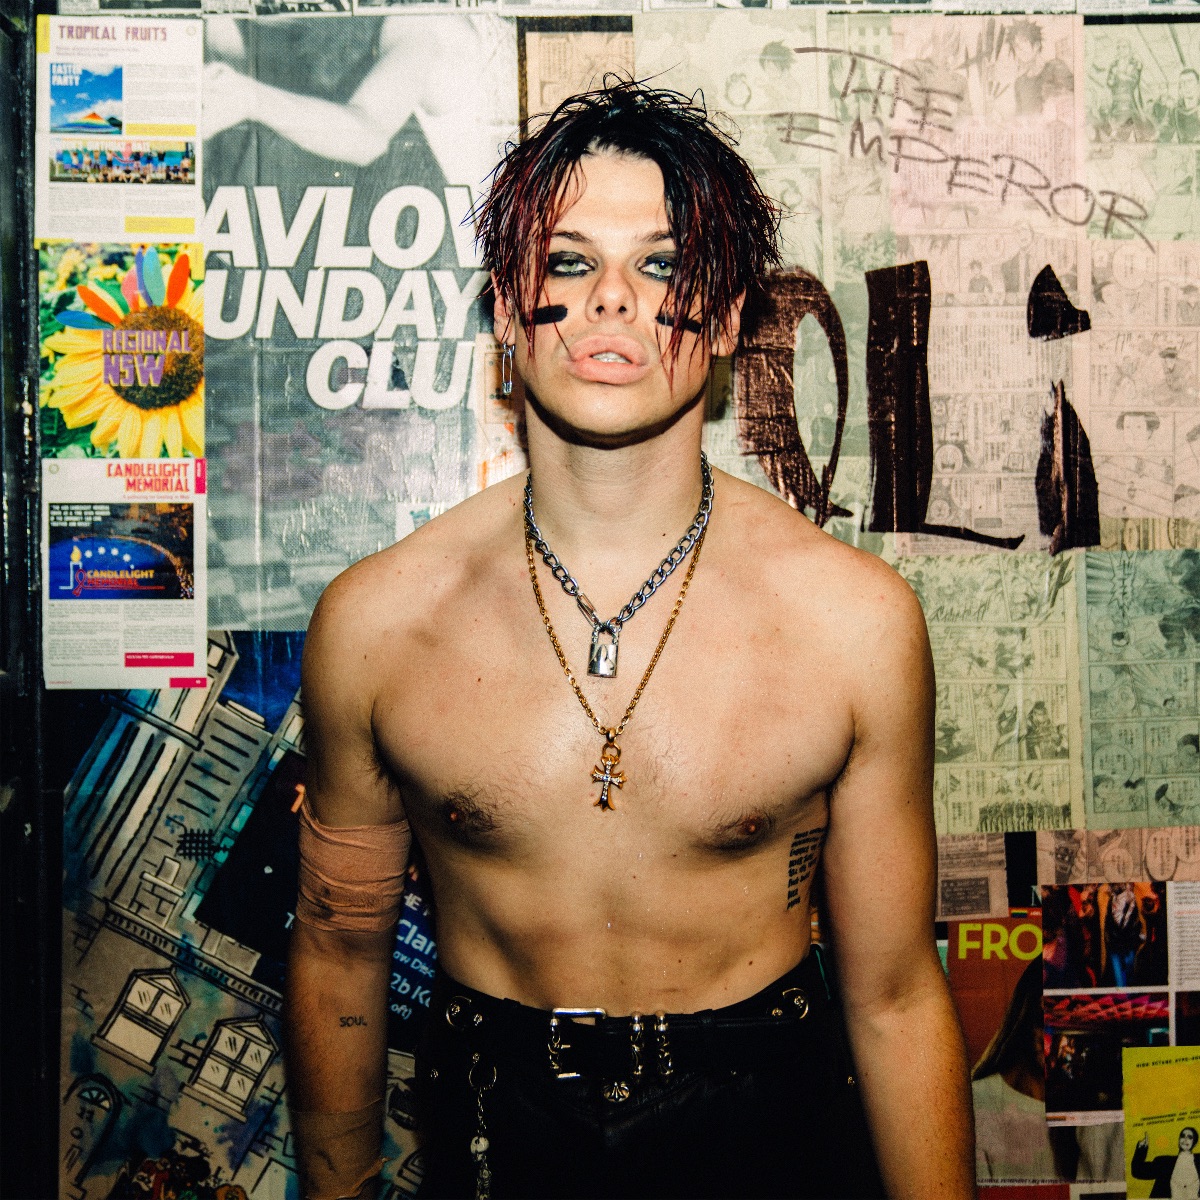 MUSIC NEWS: Yungblud Releases New Single ‘The Emperor’